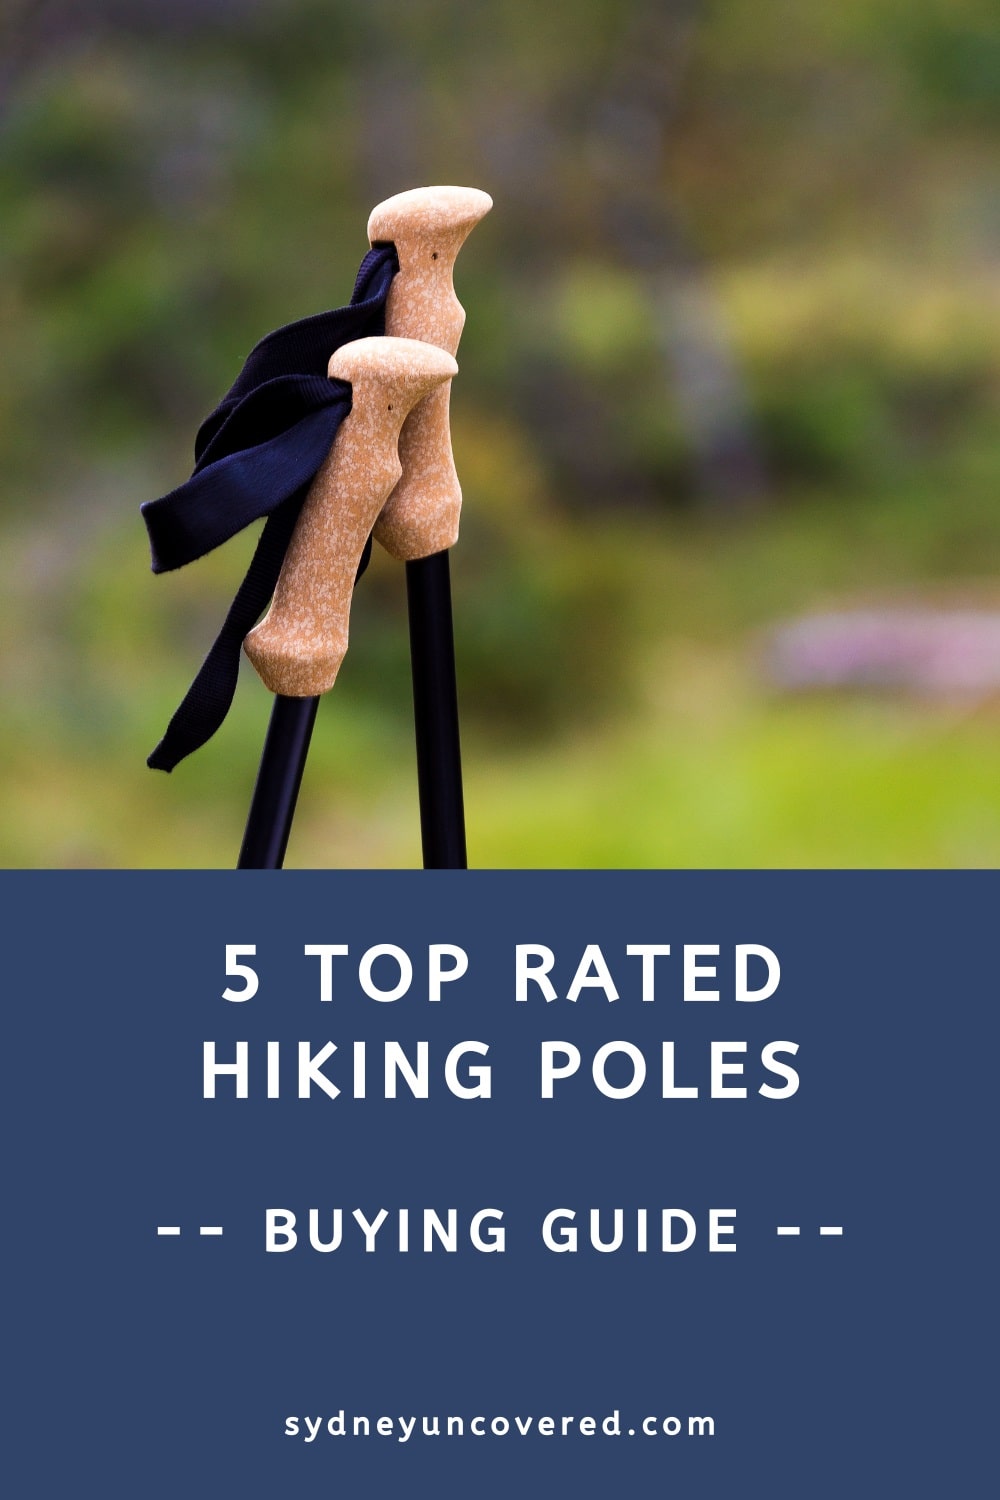 5 Top rated hiking poles (buying guide)